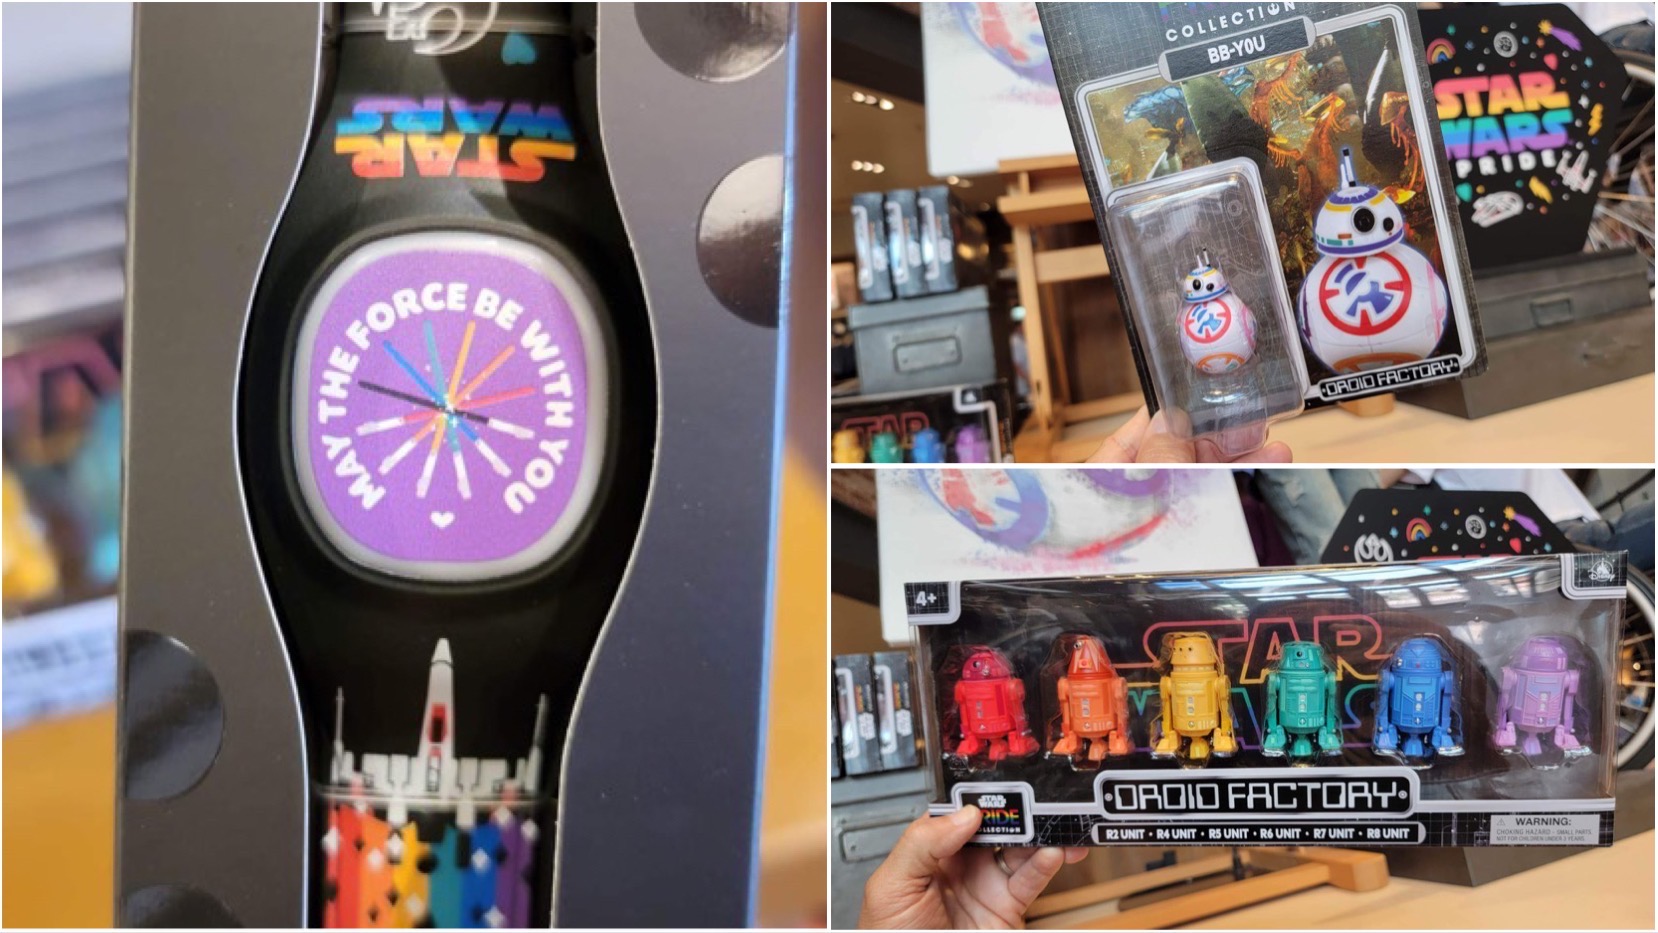 Star Wars Pride Products Spotted At Walt Disney World!